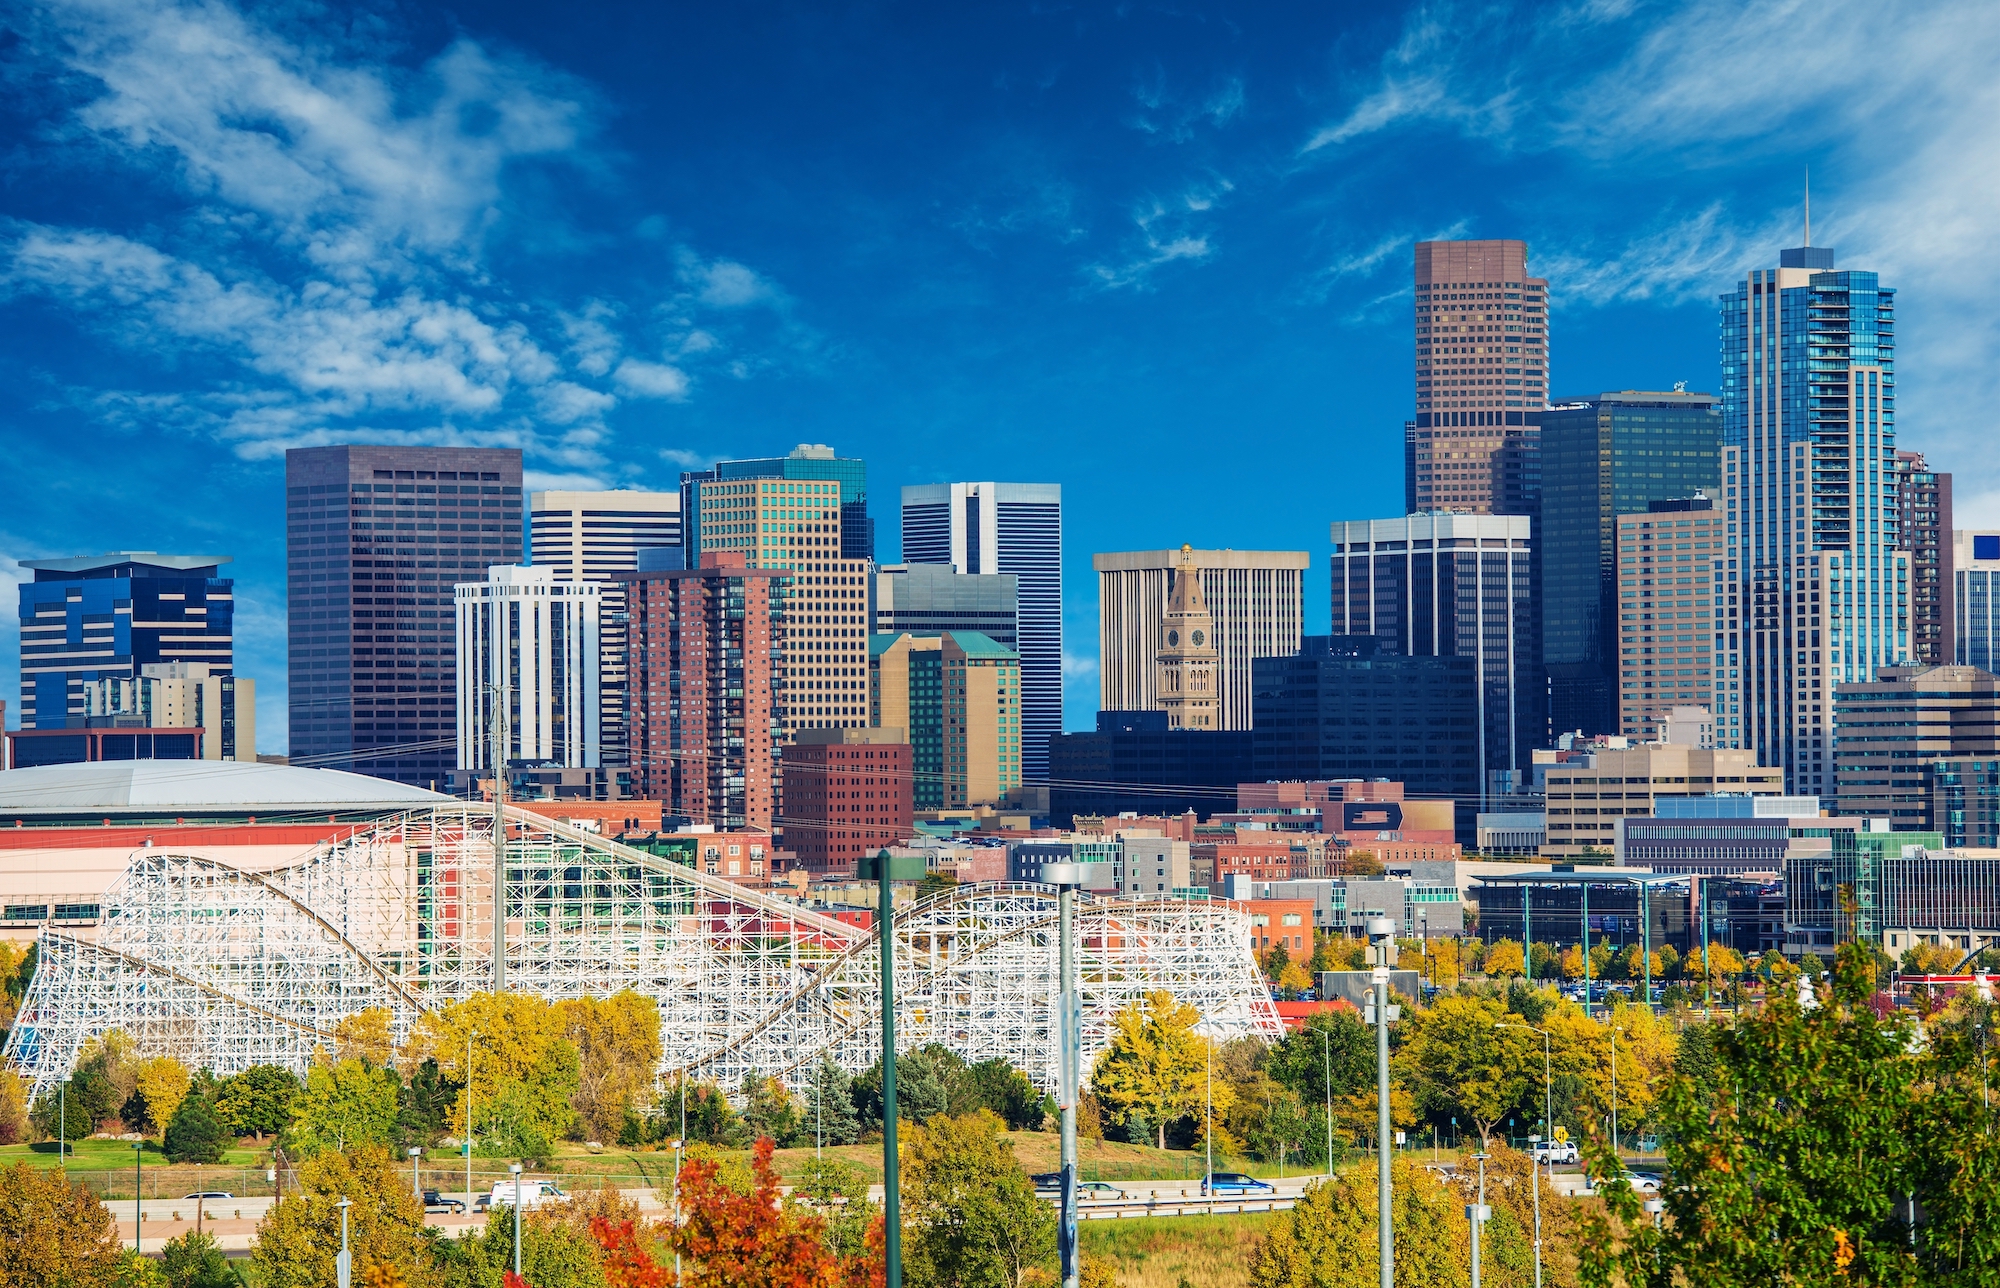 A photo of a city in Colorado is shown.